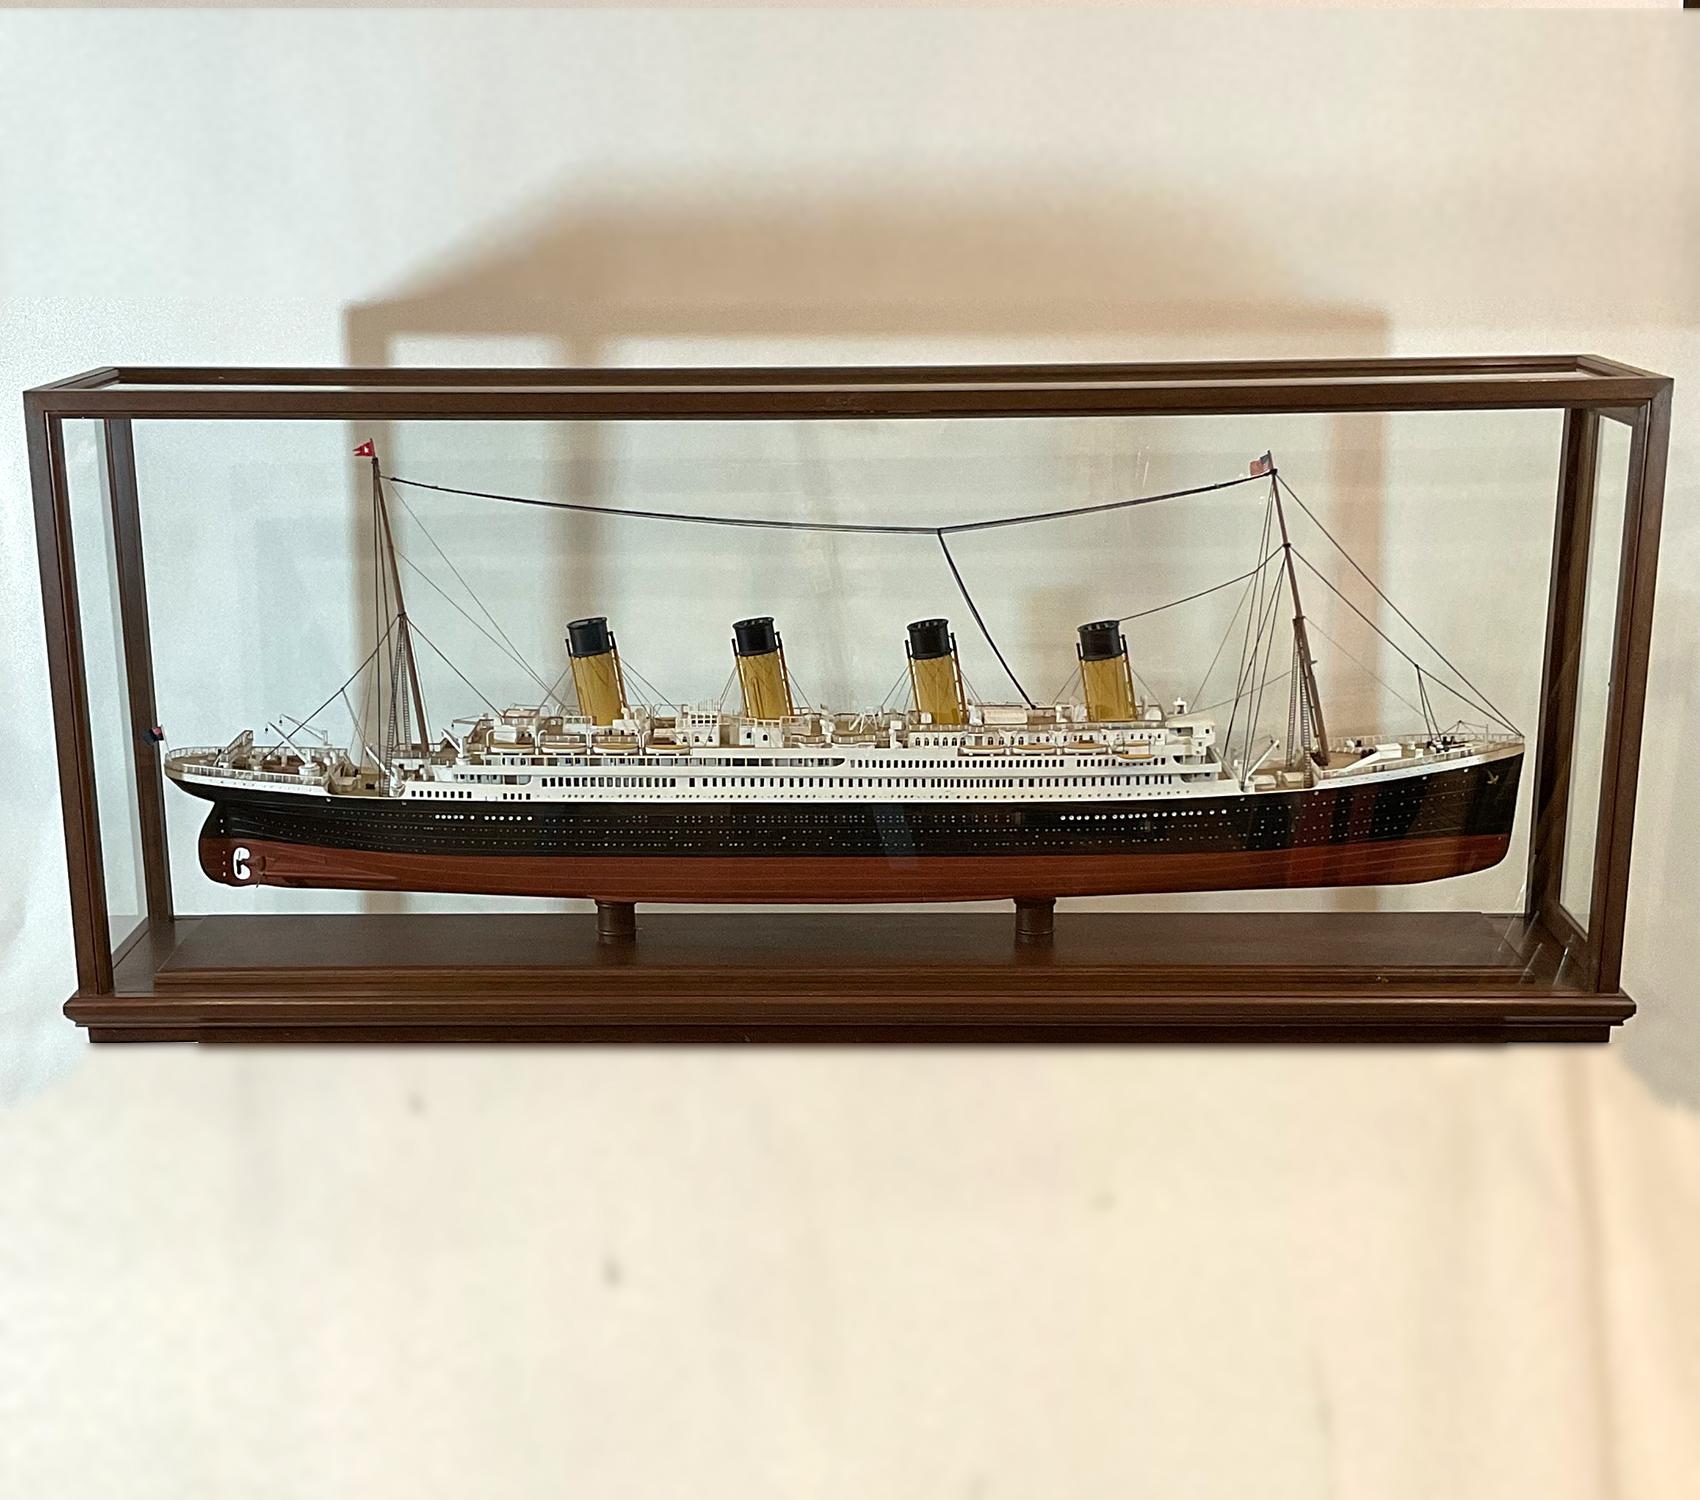 Fine cased model of the white star liner “Titanic”. Well executed model of the classic and famous four stack liner. Details include lifeboats, cargo booms, skylights, cabins, railings, winches, chains, anchors, benches, etc. Fitted to a glass